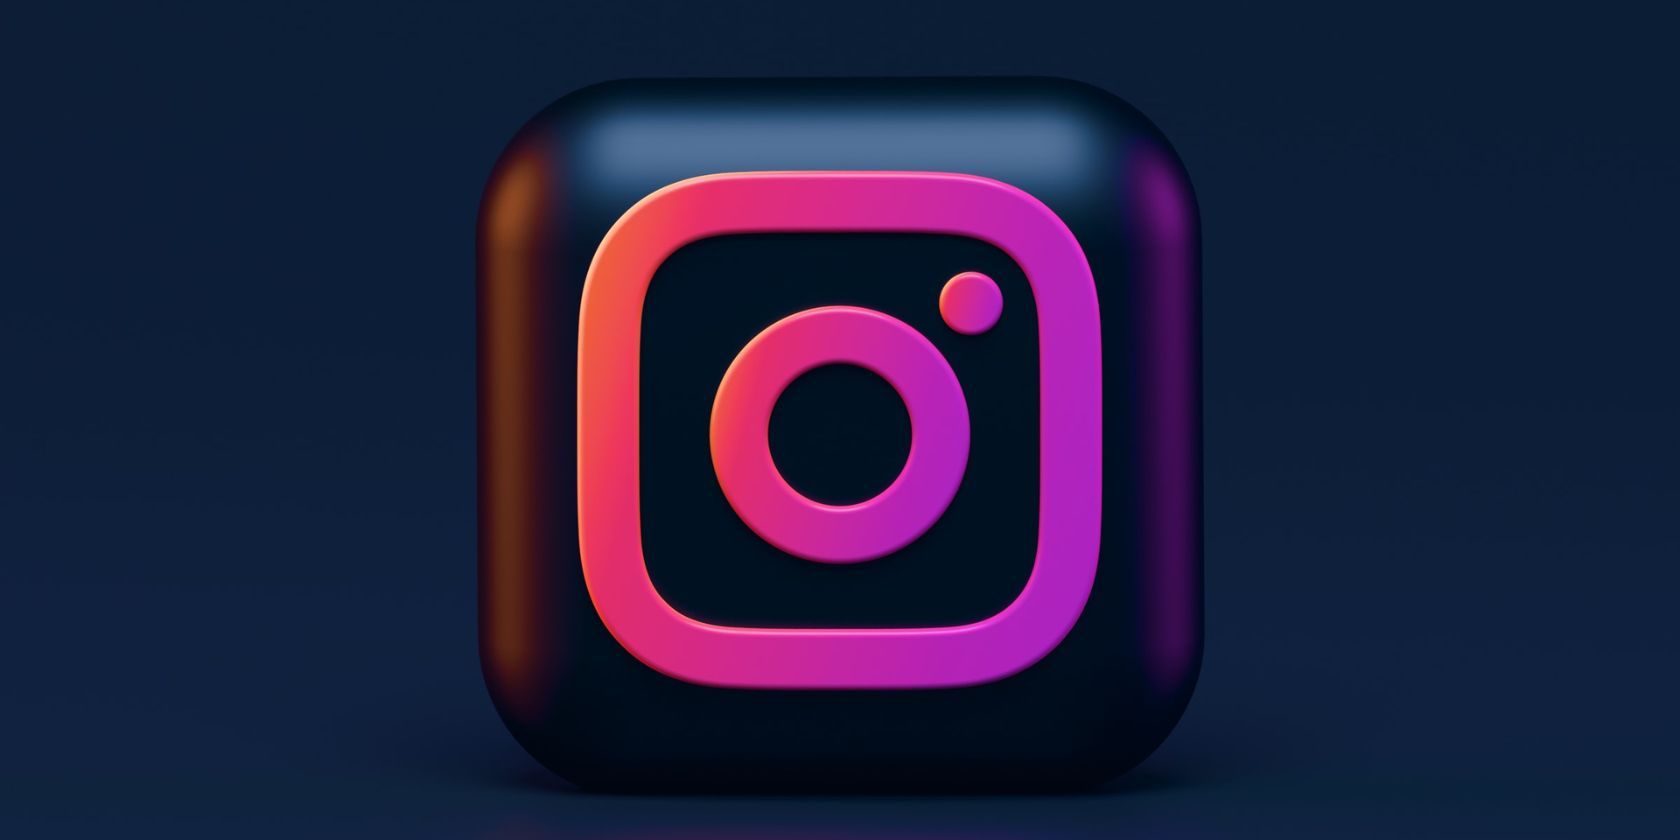 What Size Should Your Instagram Photos and Videos Be?